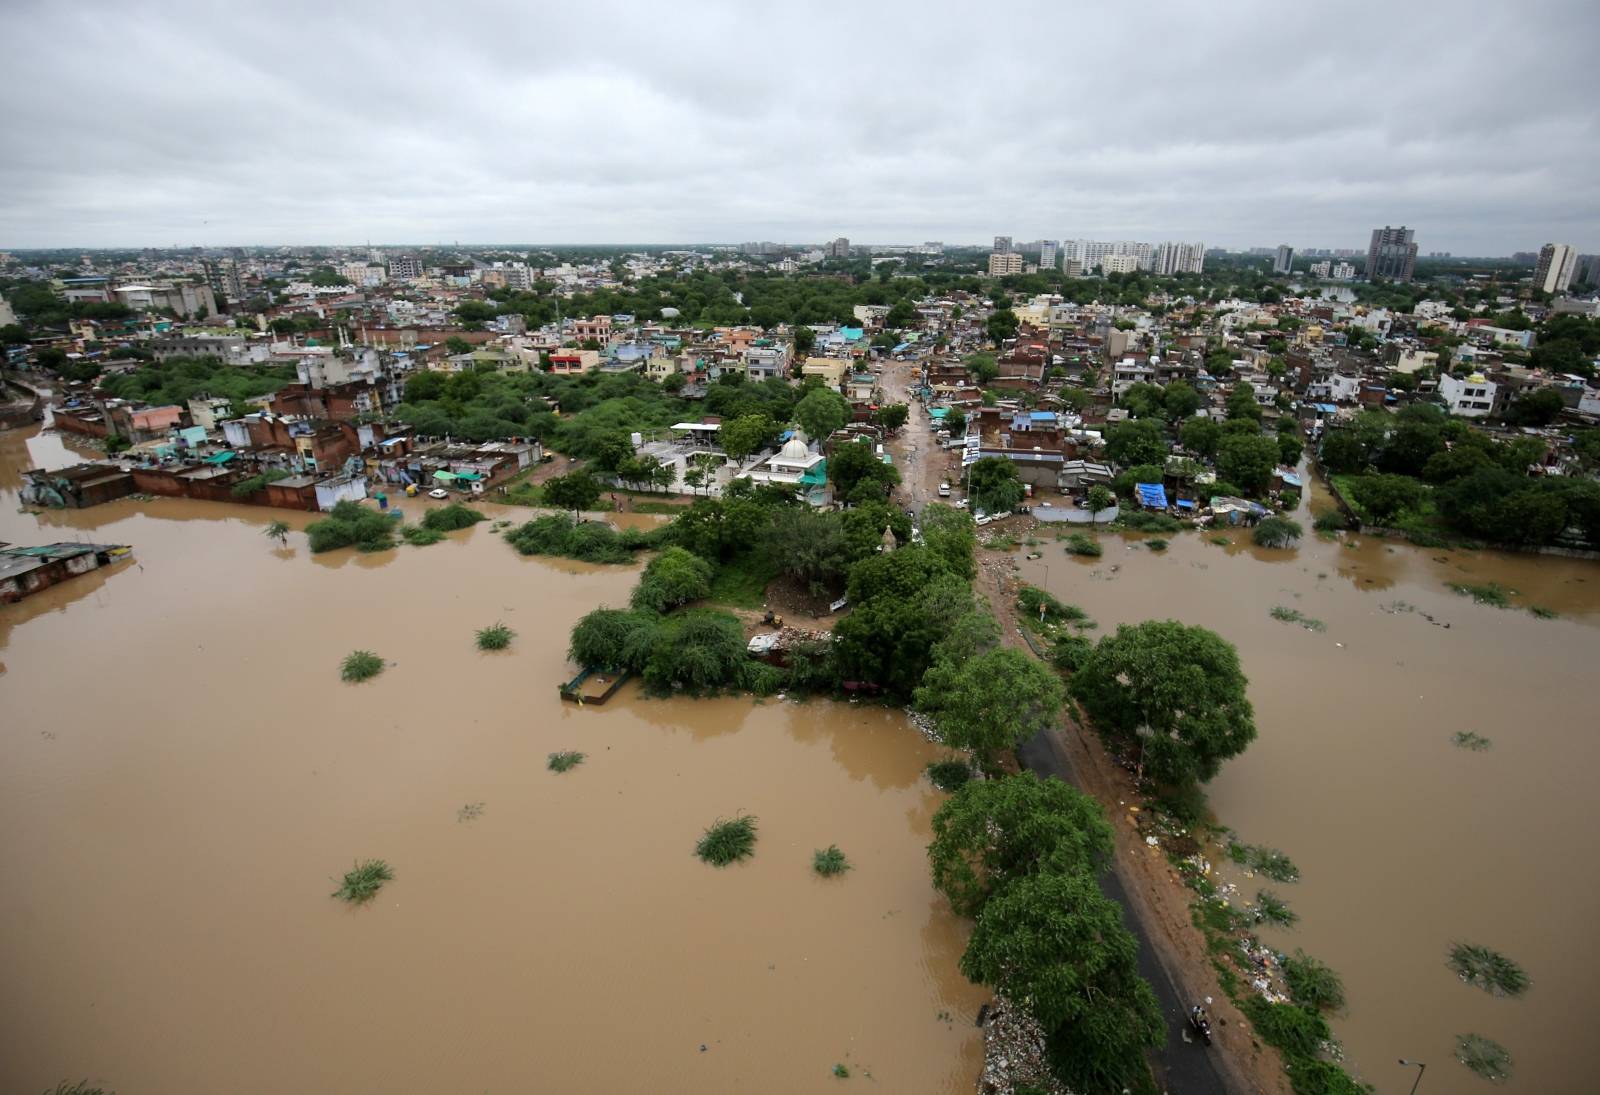 An aerial view shows a flooded residential area after heavy rains in Ahmedabad